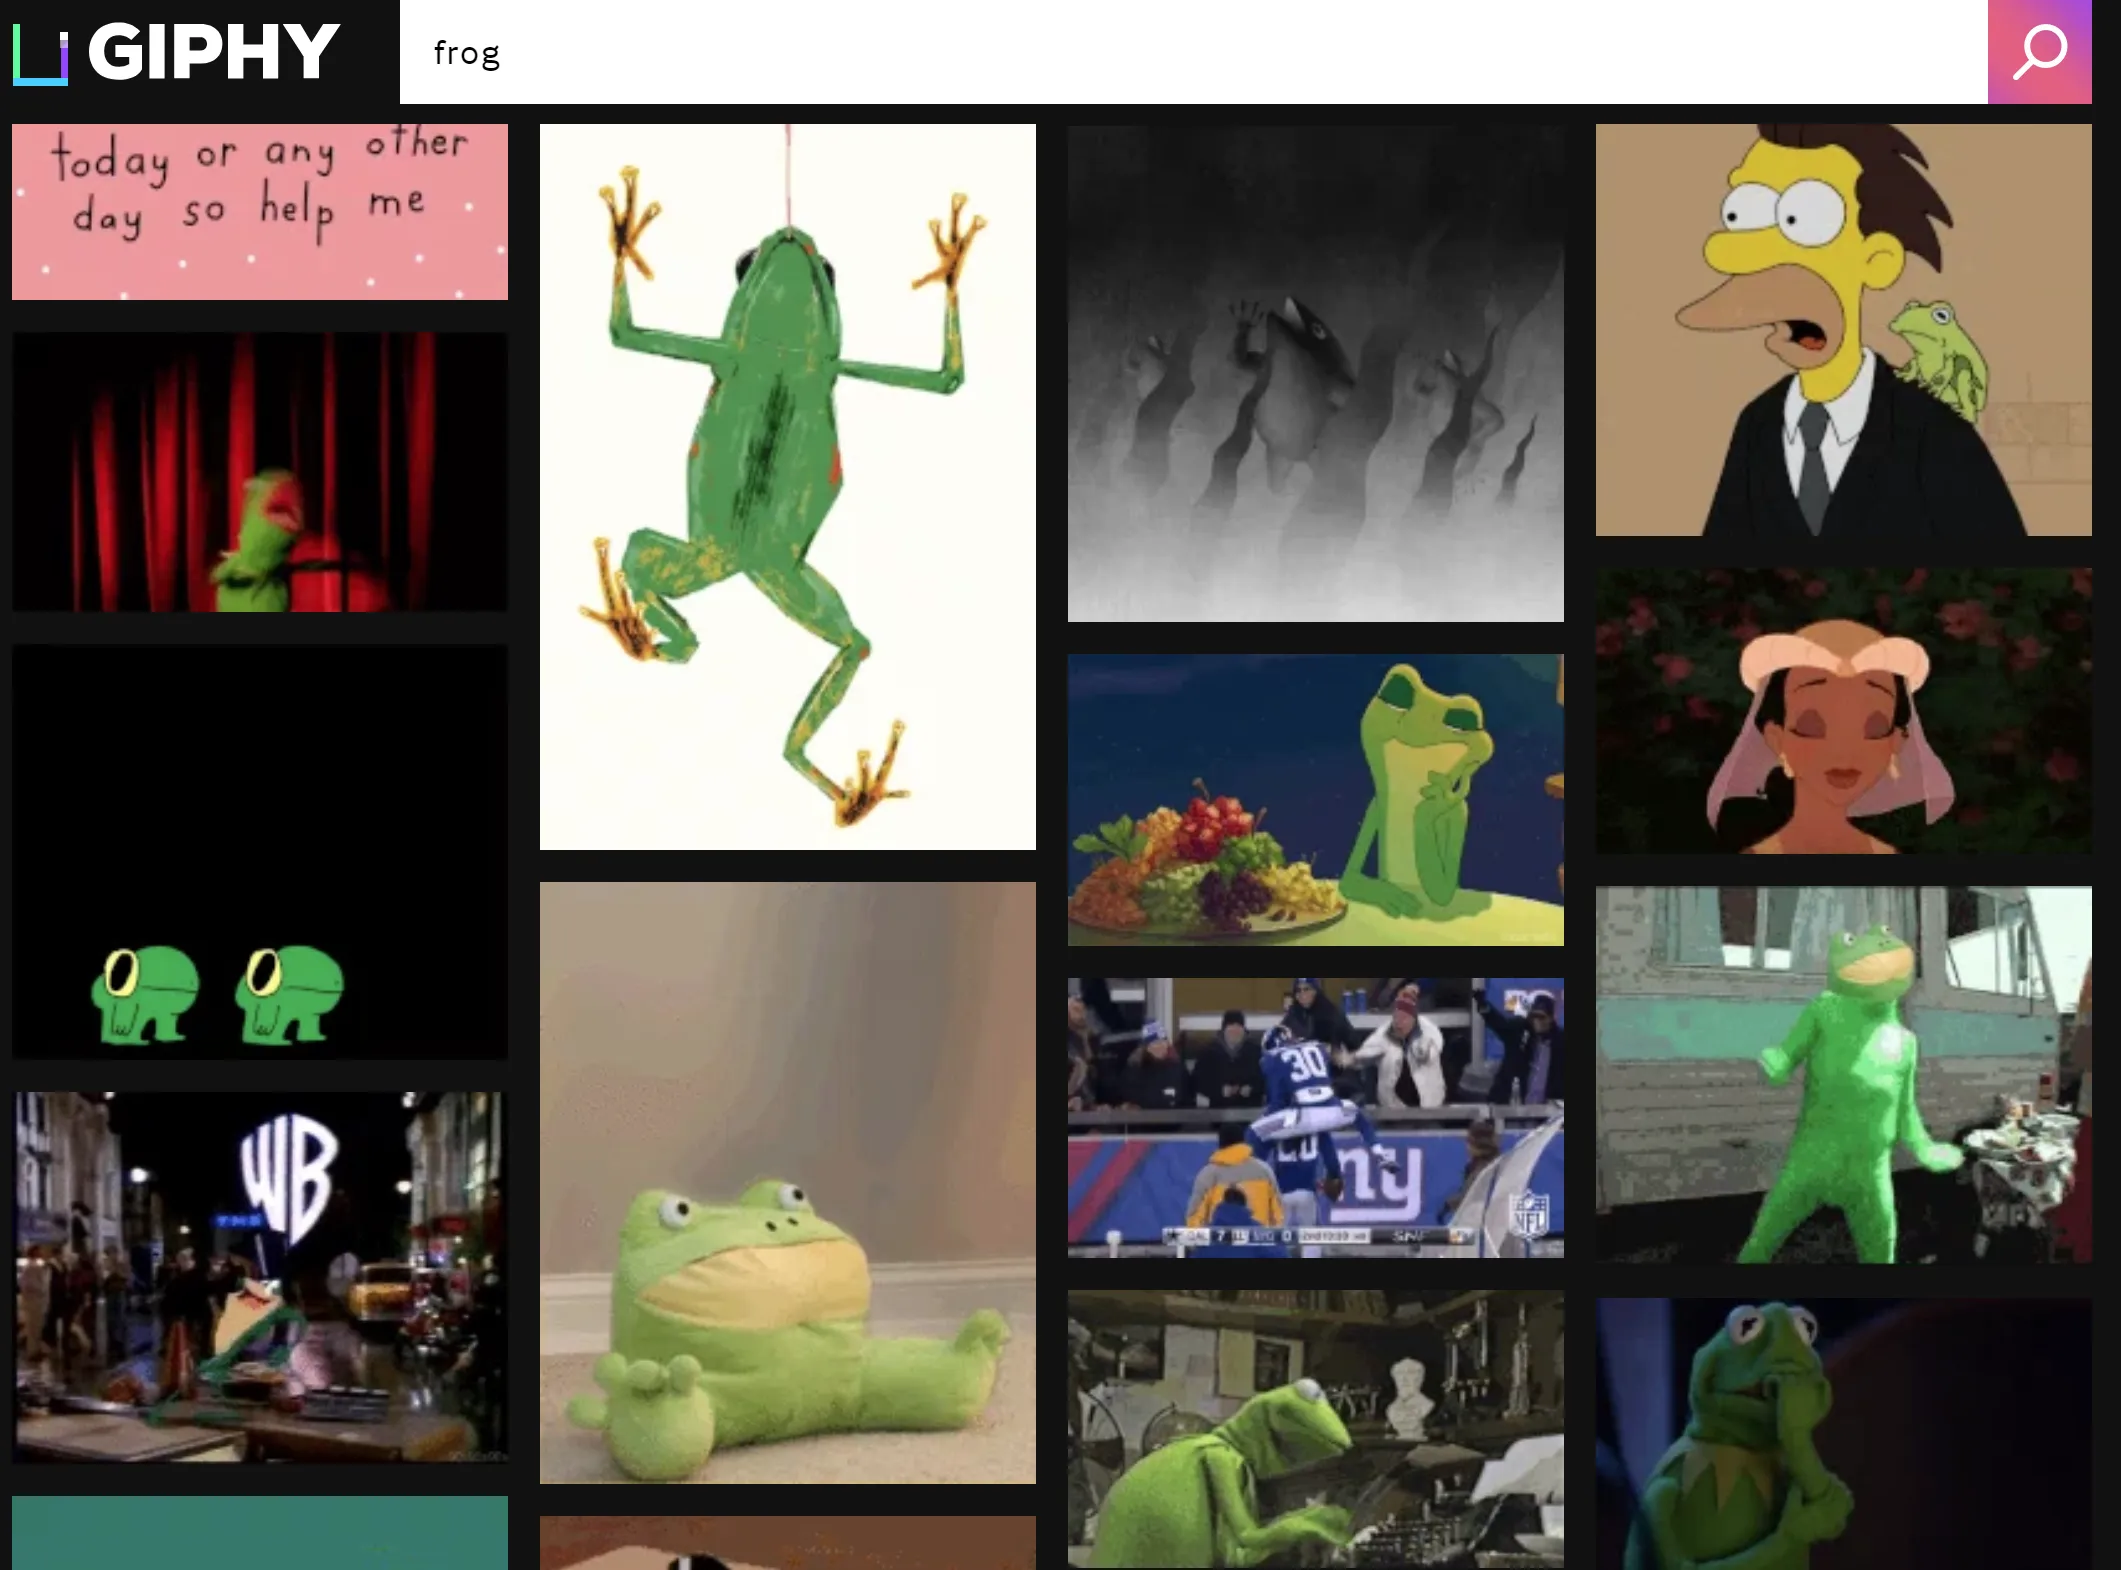 Giphy search for 'frog'